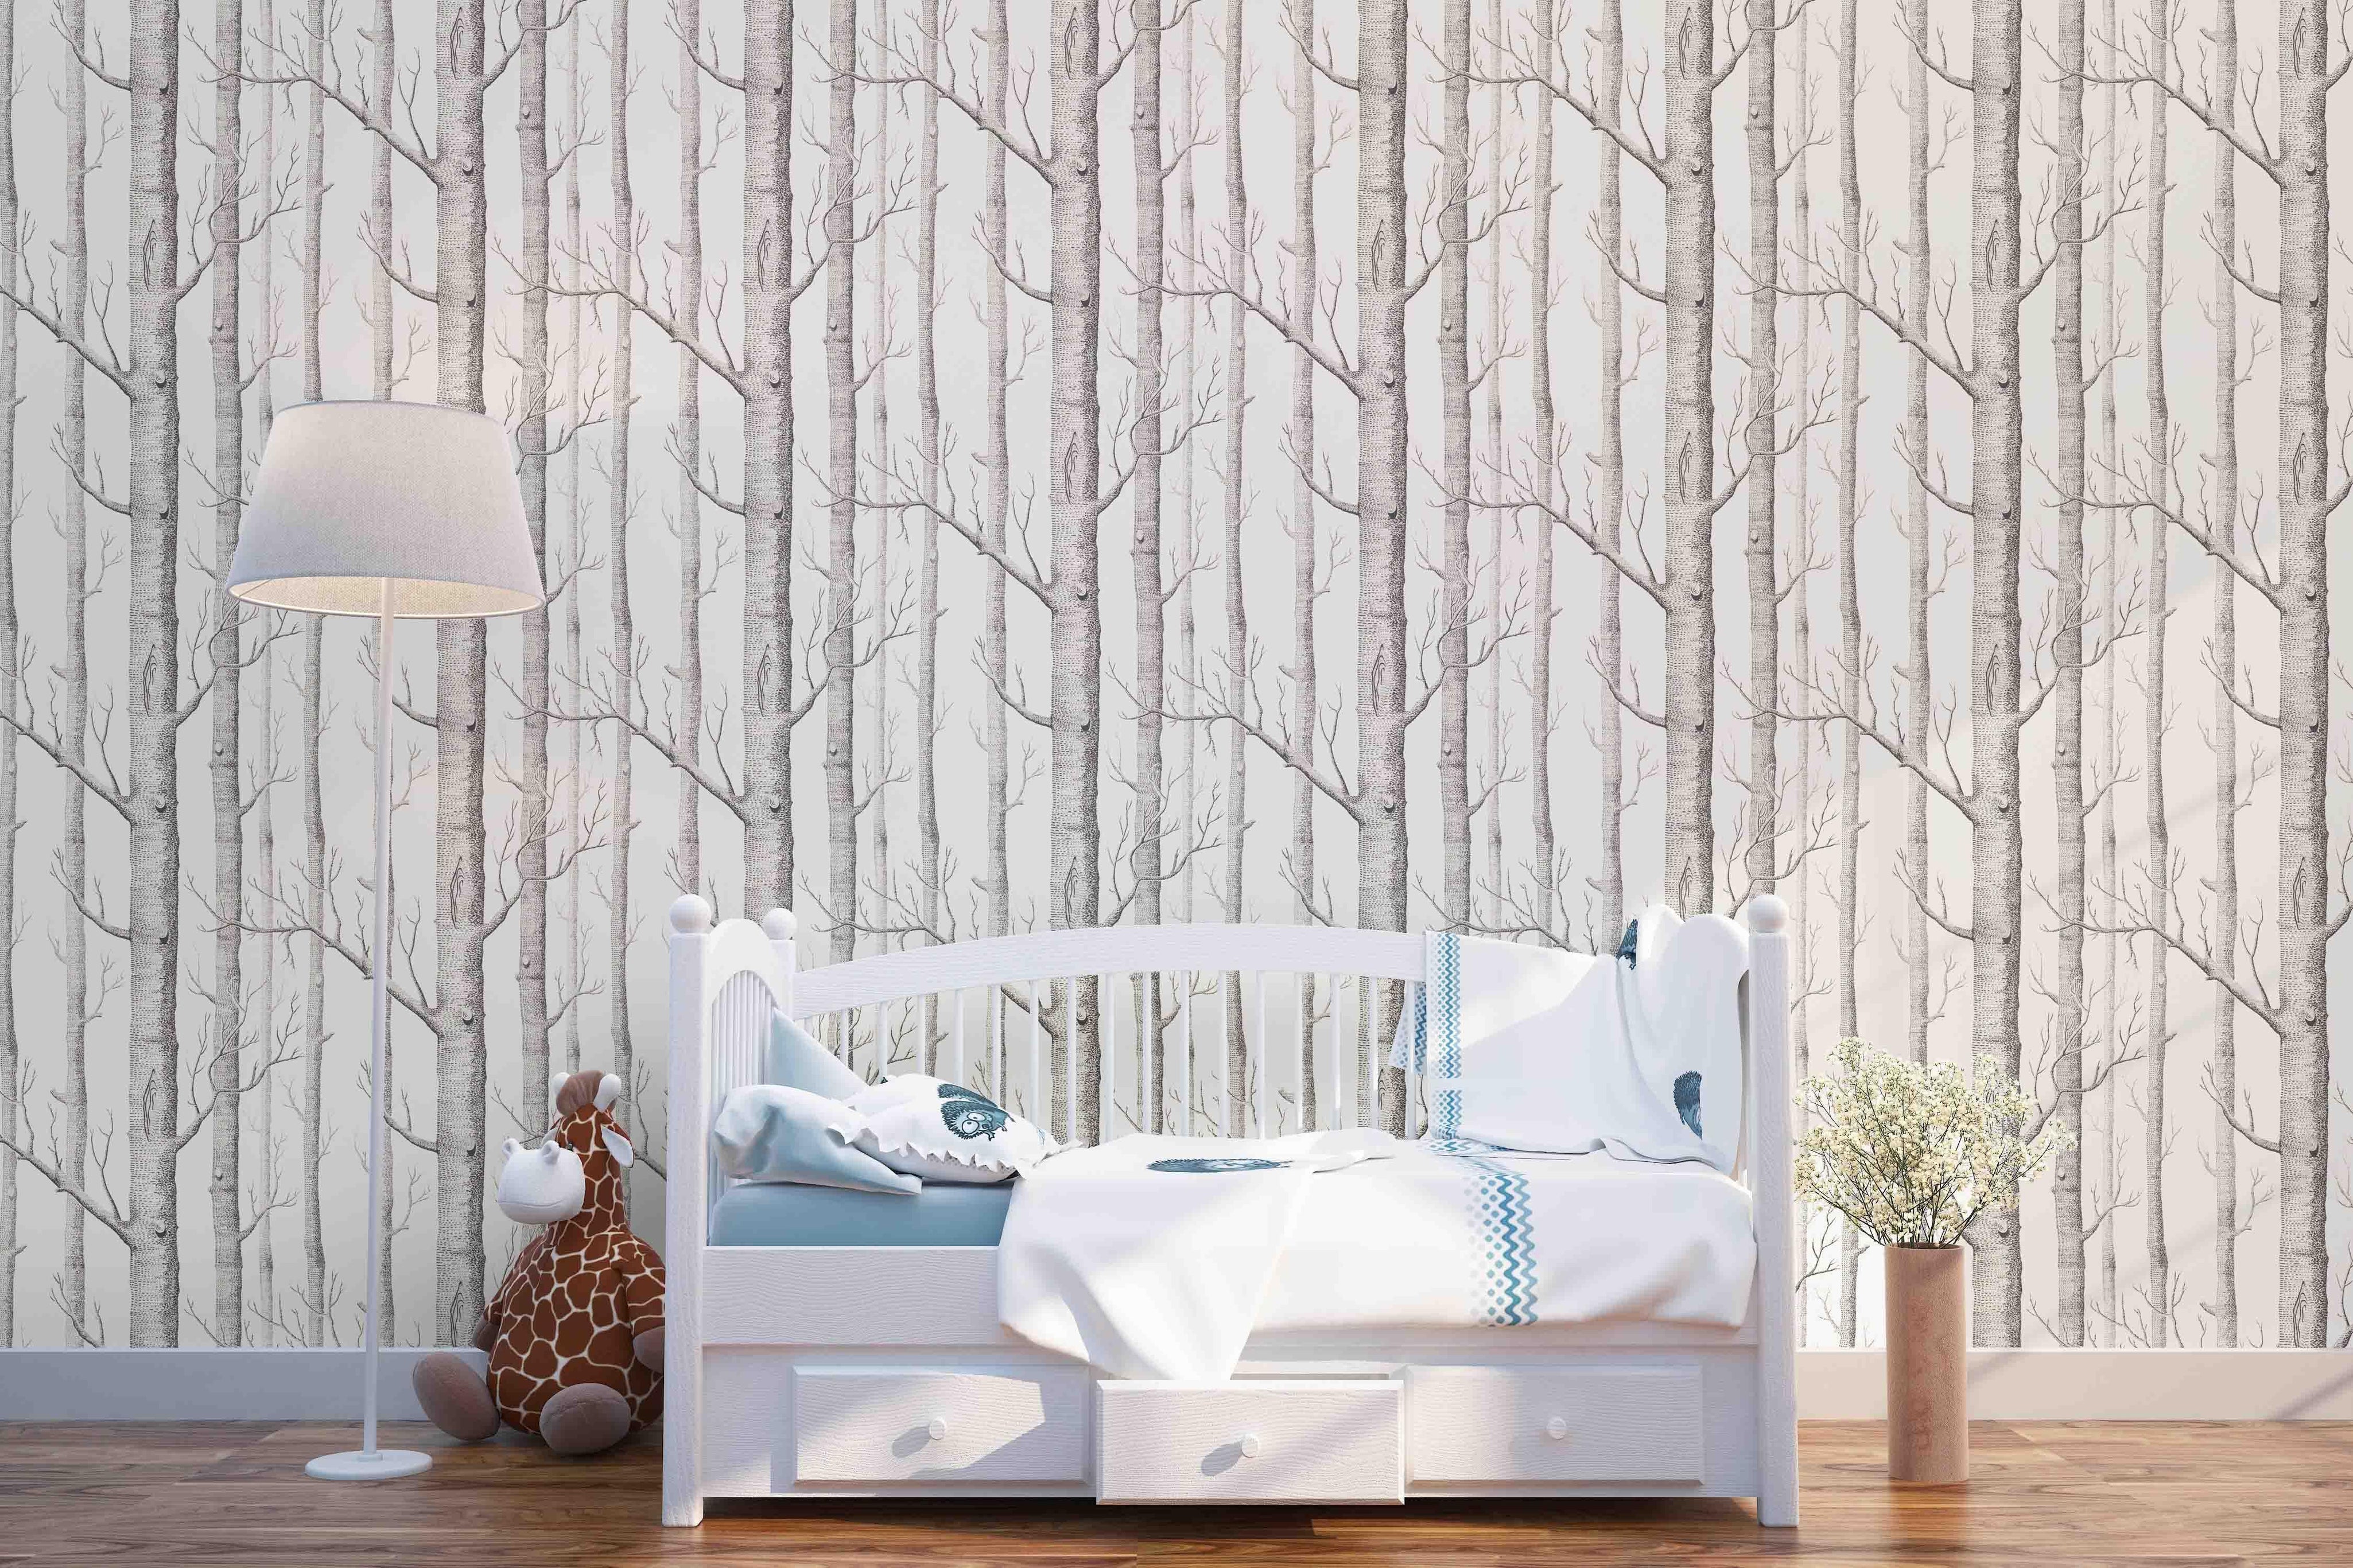 3D Simple Black White Forest Wall Mural Wallpaper 32- Jess Art Decoration